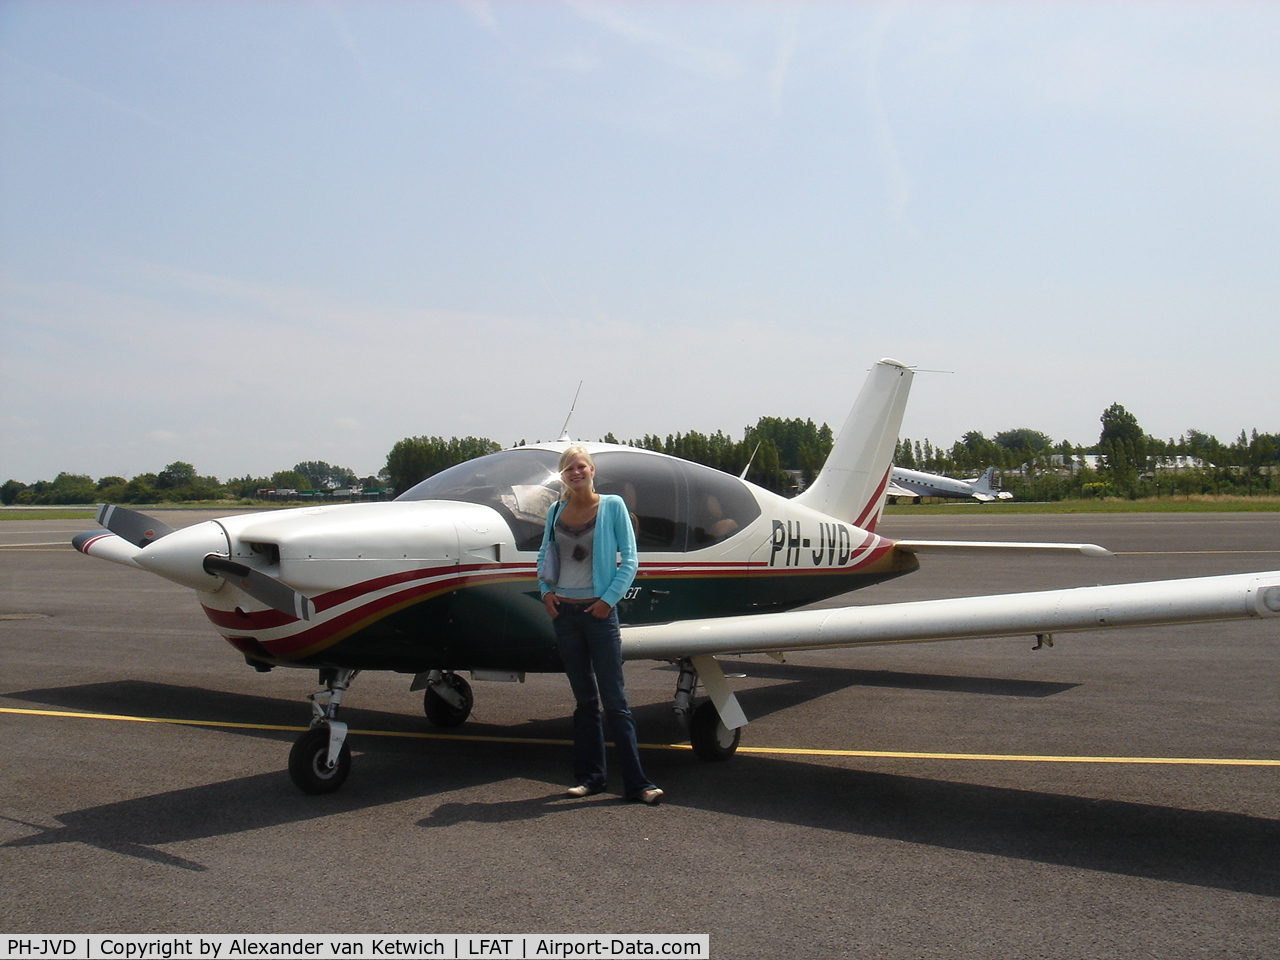 PH-JVD, Socata TB-20 GA C/N 2052, With my daughter Kirsten at Le Touquet, France